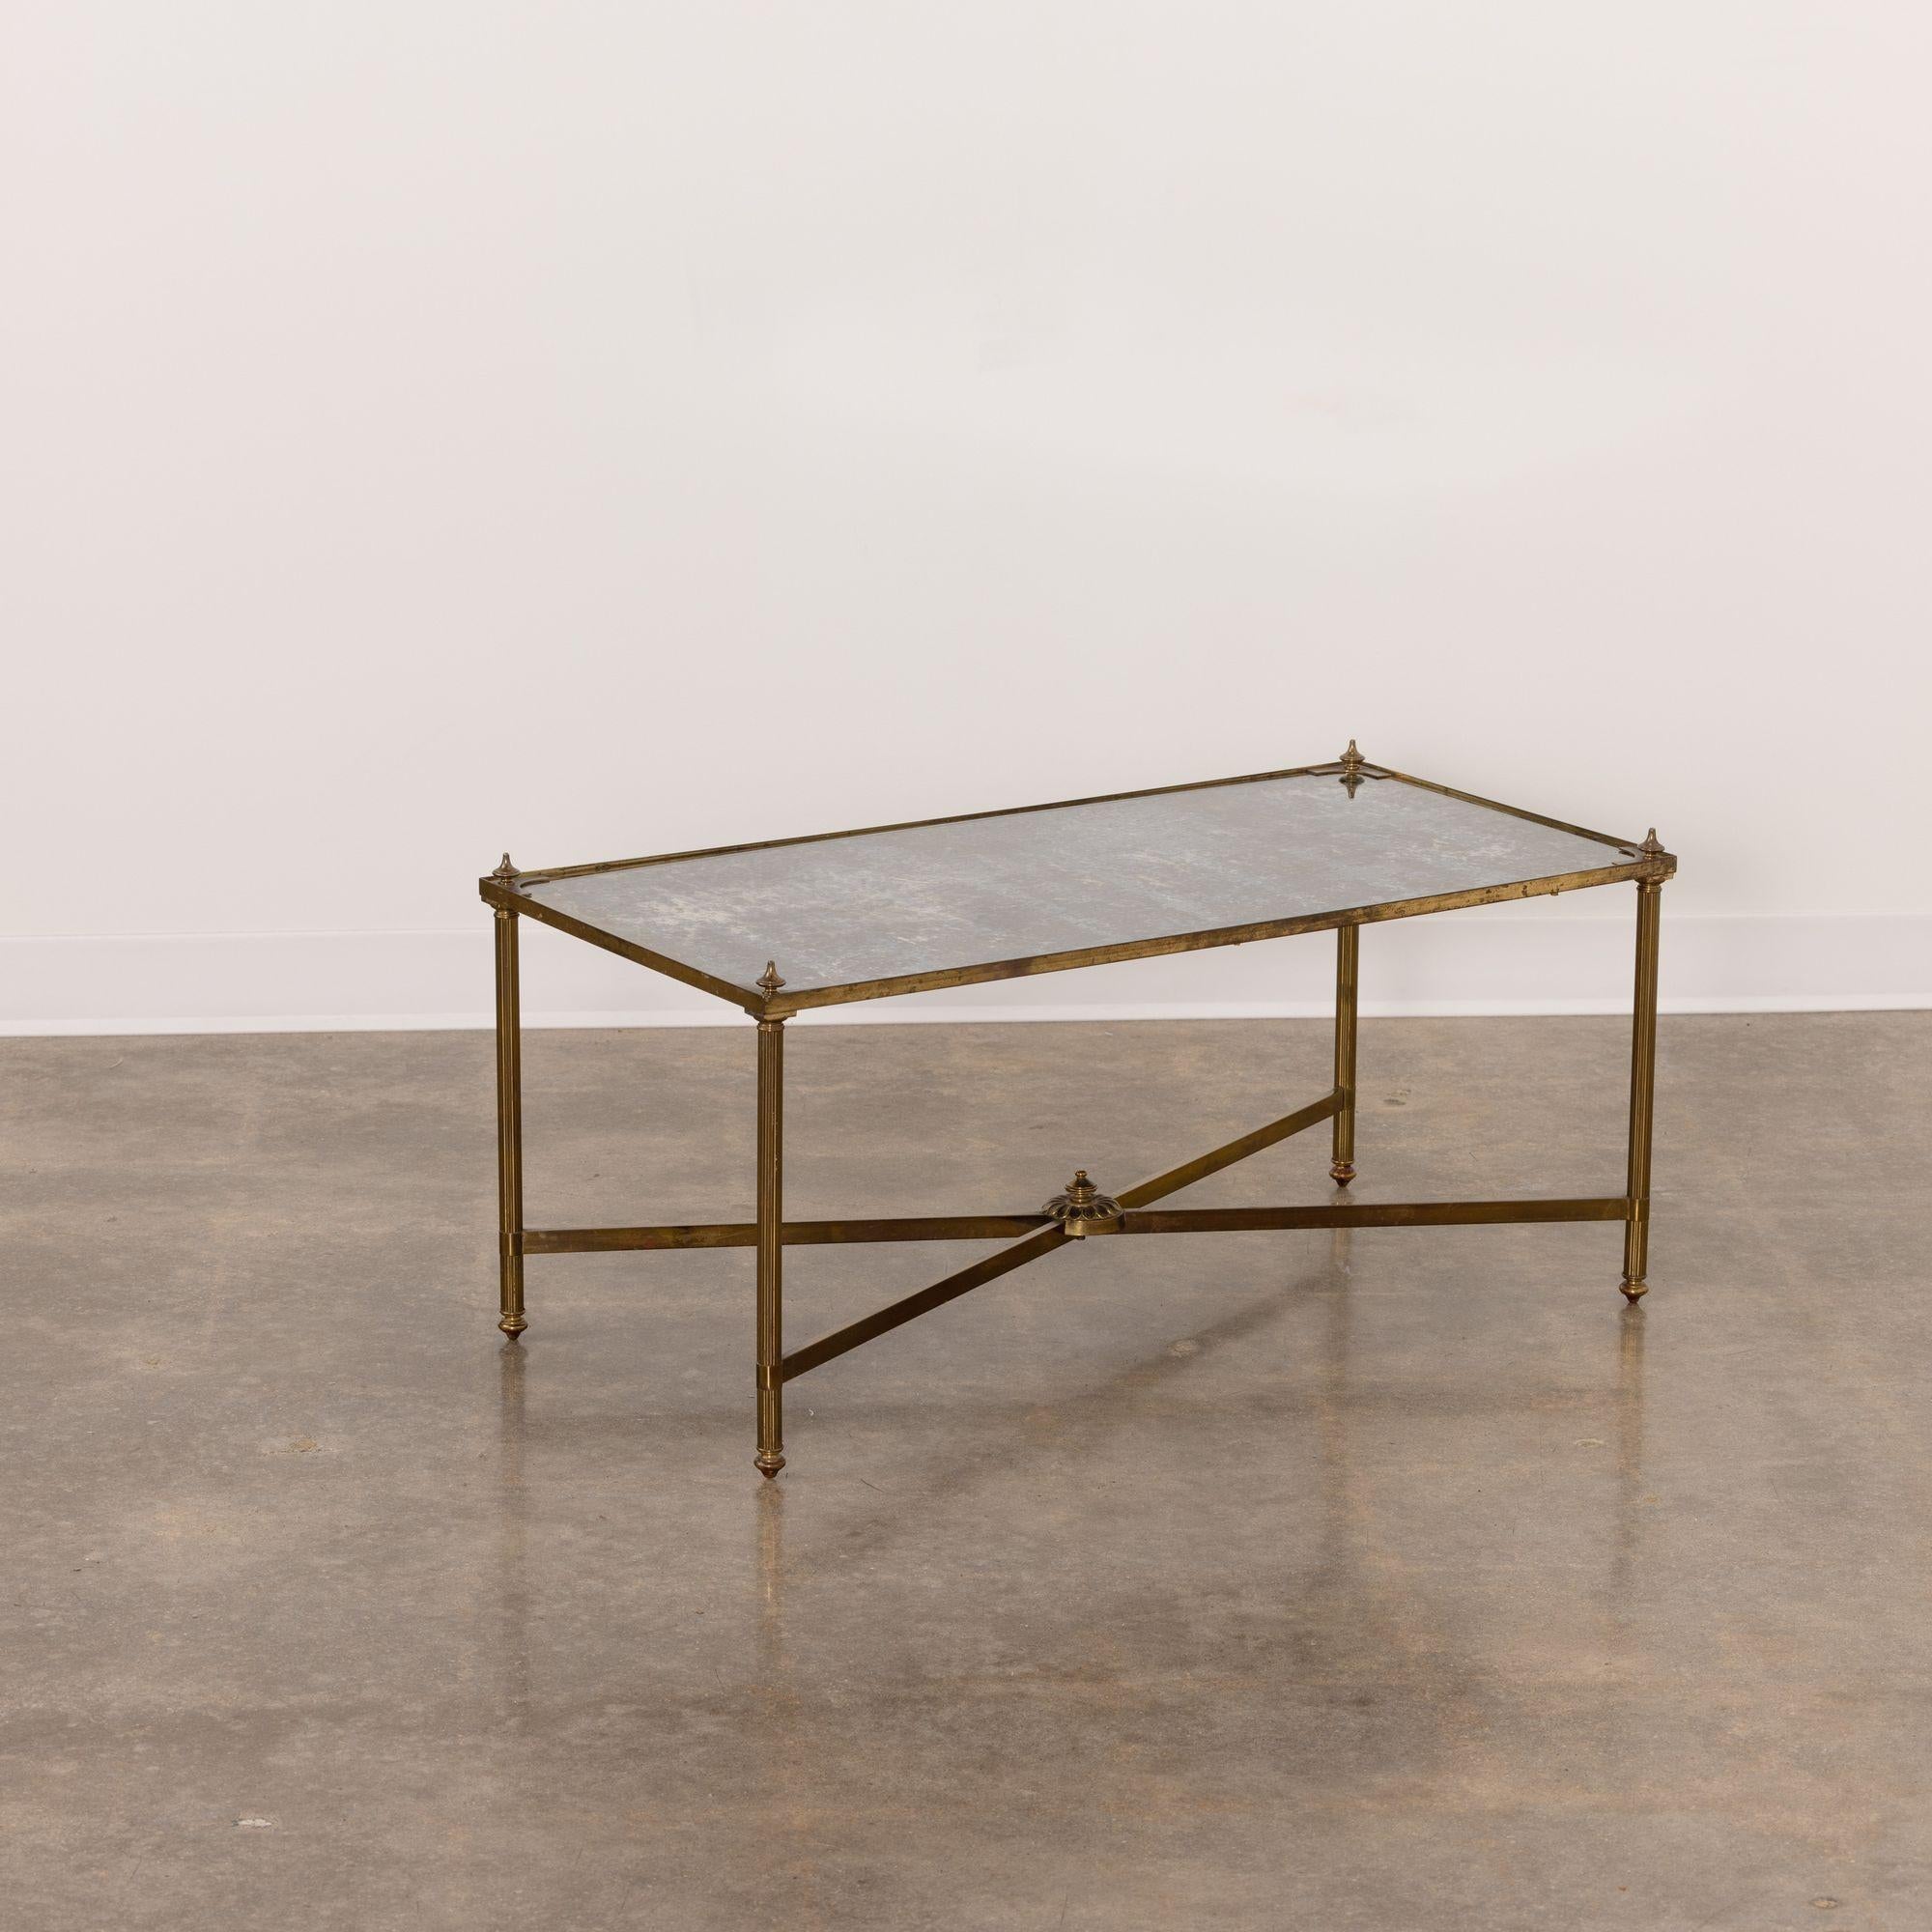 An elegant French brass cocktail table with an eglomisé top in the Hollywood Regency style, c. 1950. The beautiful rectangular table stands on four, fluted, brass legs joined by a cross stretcher base embellished with a finial.  The top is finished